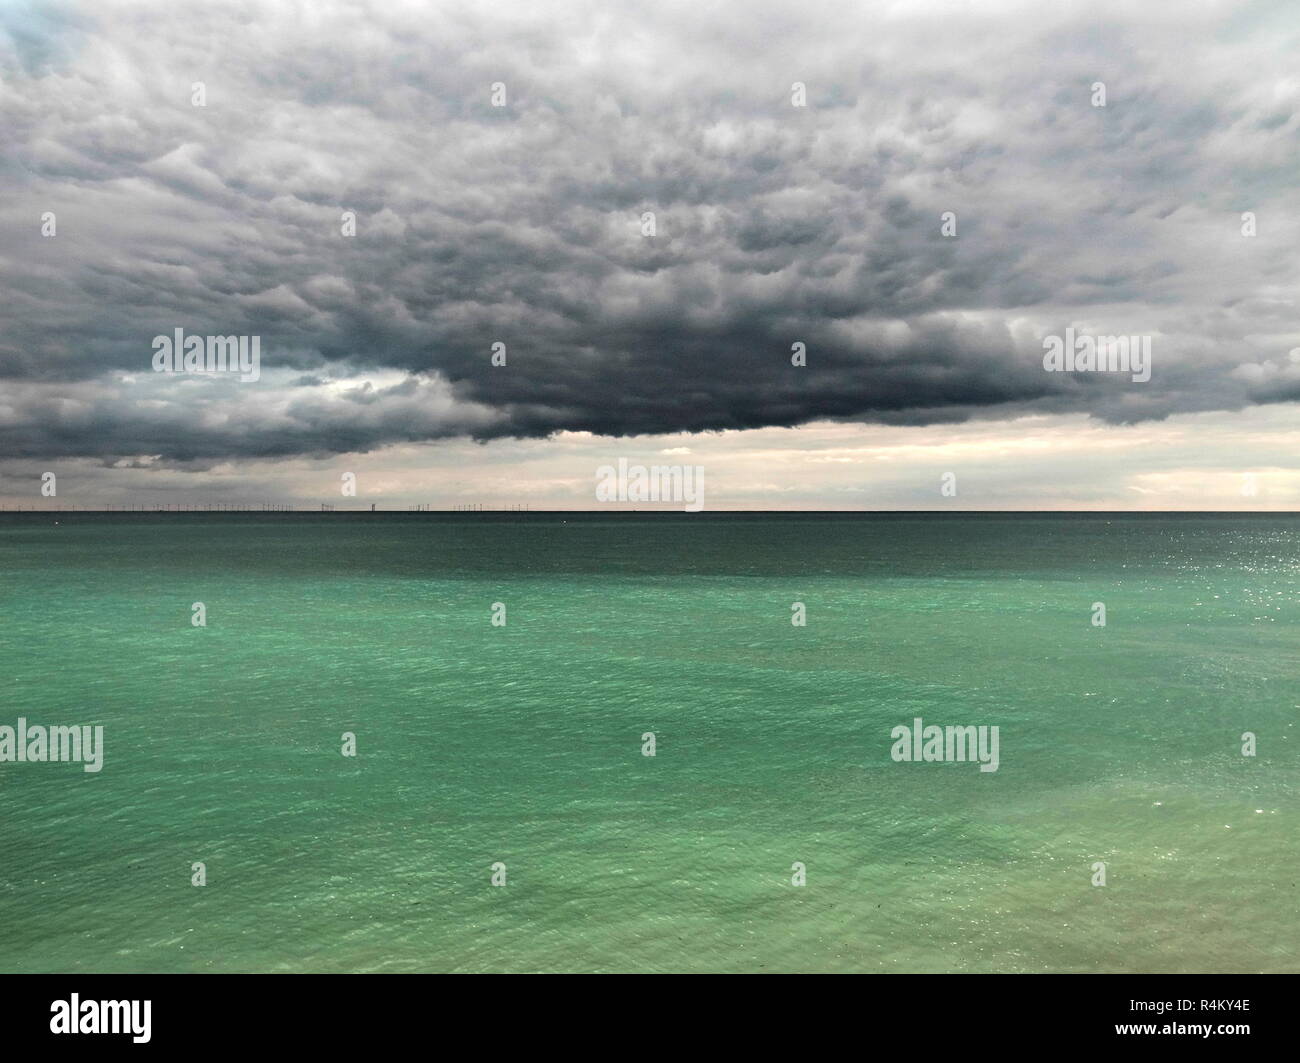 AJAXNETPHOTO. 2018. WORTHING, ENGLAND. - CALM BEFORE THE STORM - BROODING LOW STRATUS CLOUD HOVERS OVER AN EMERALD GREEN SEA LOOKING OUT ACROSS THE CHANNEL.  PHOTO:JONATHAN EASTLAND/AJAX REF:GR181509_8453 Stock Photo